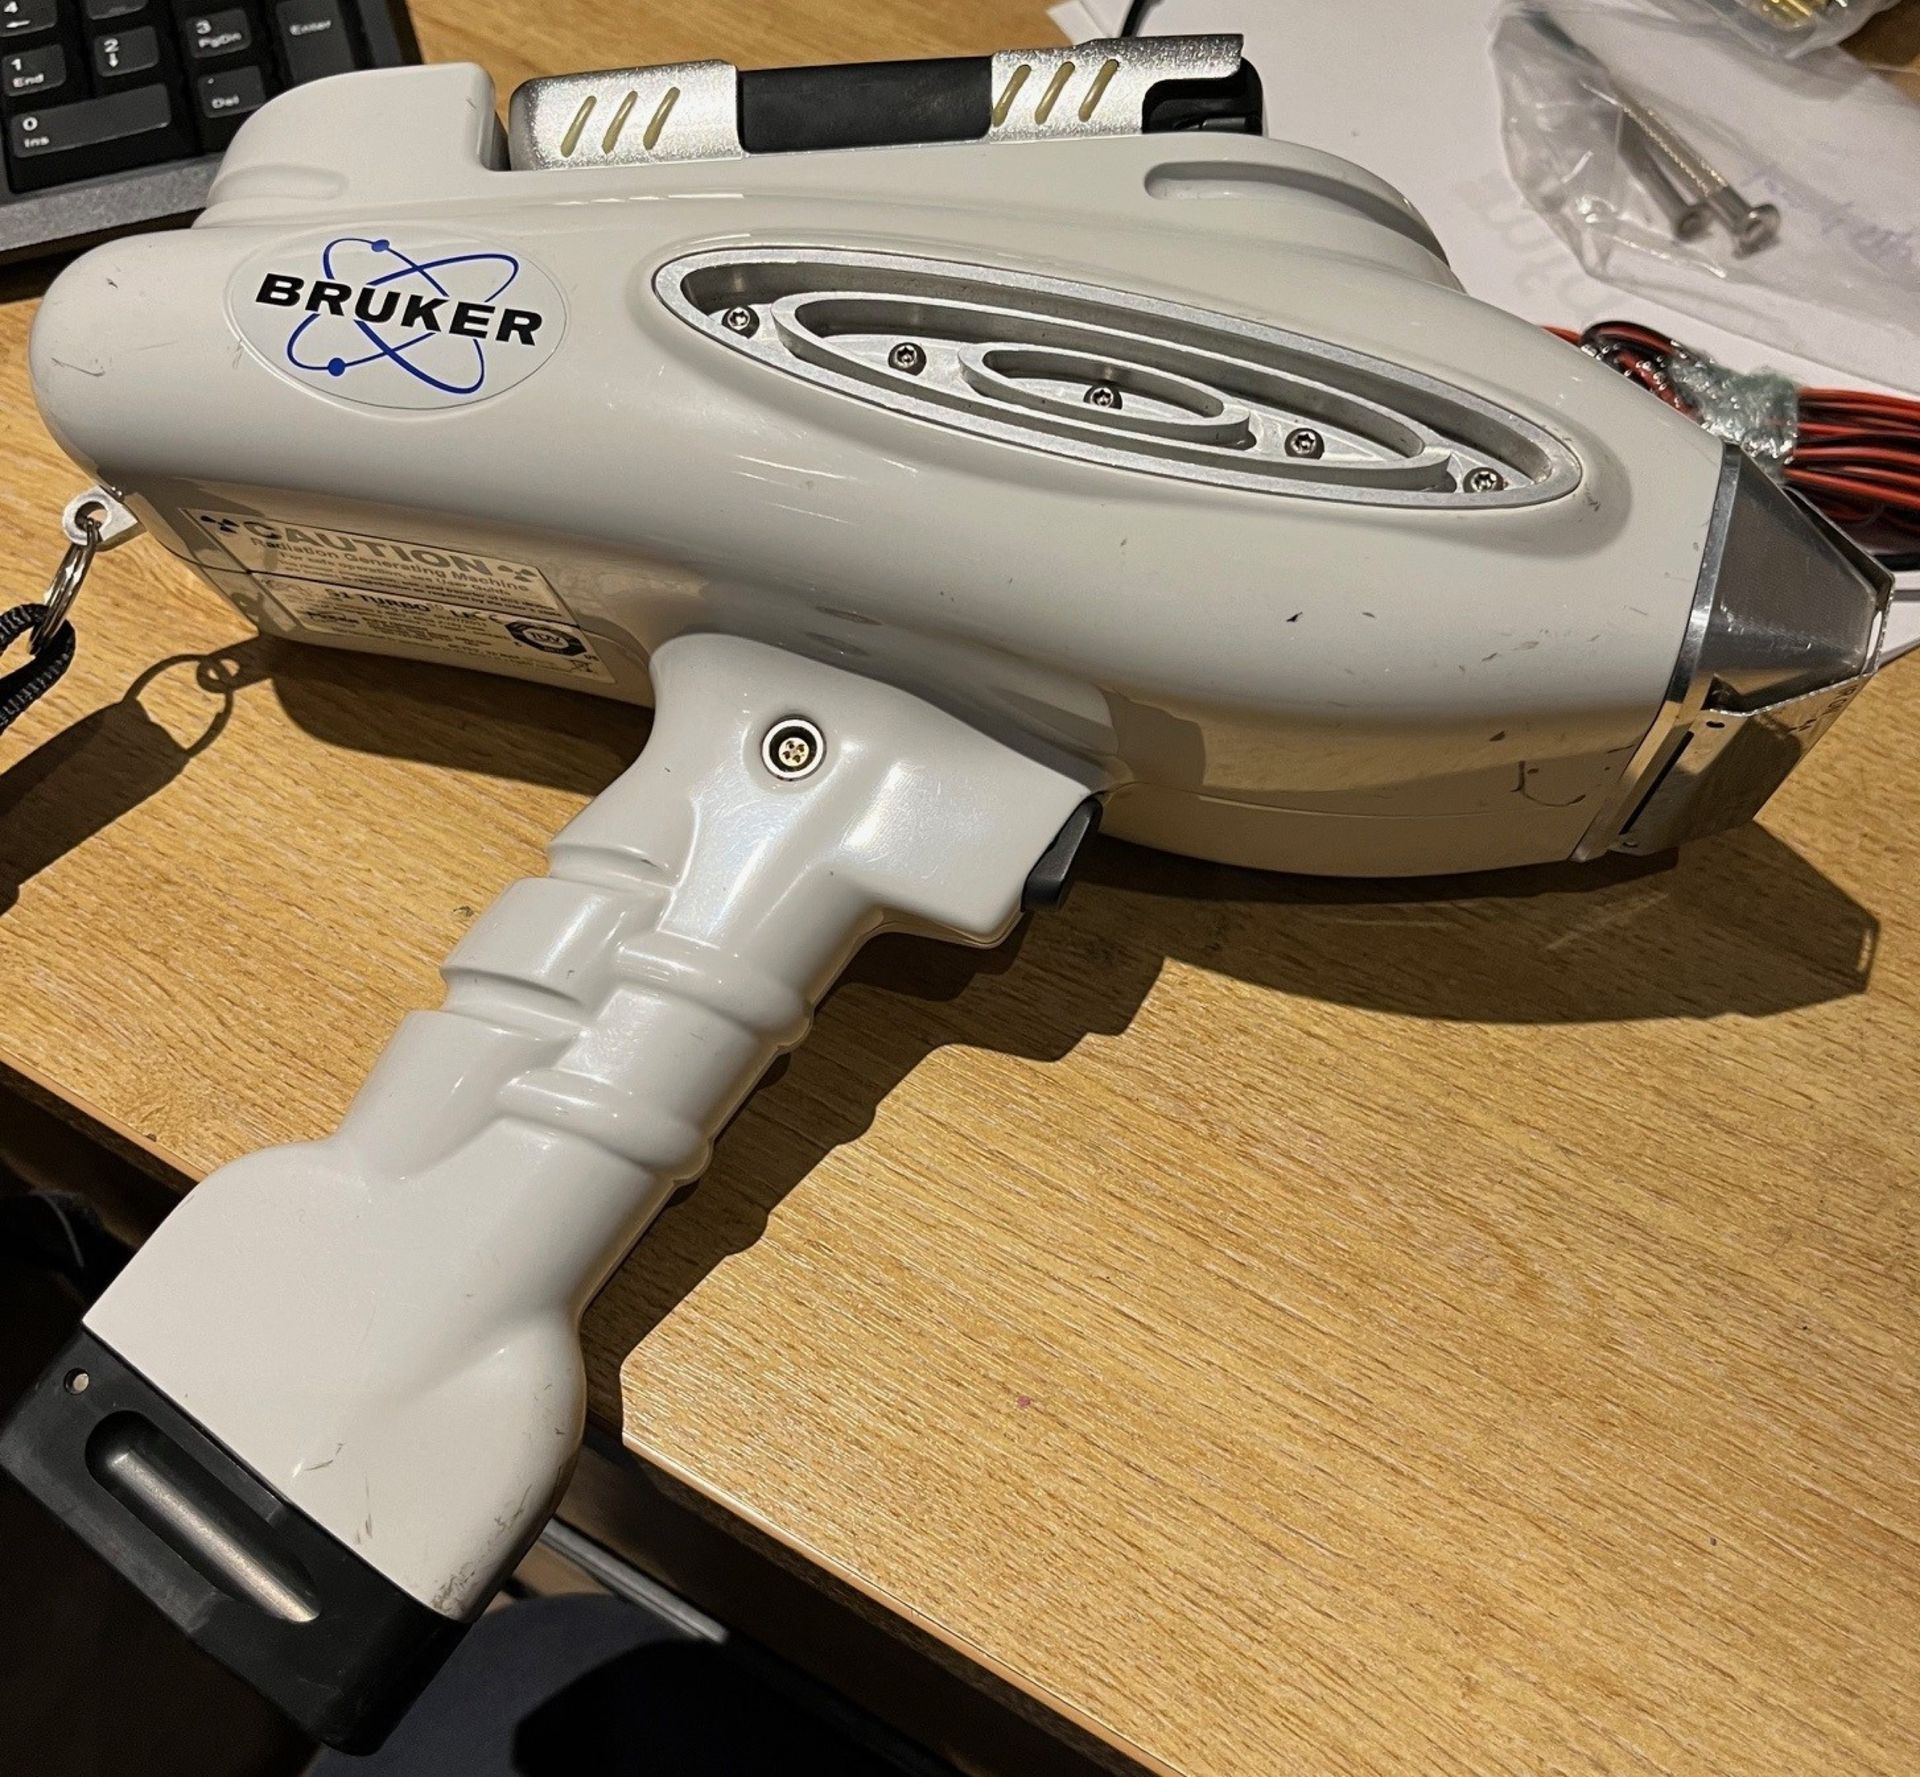 Bruker S1 Turbo SD XRF precious metal testing gun with HP control unit - We have no information - Image 2 of 2